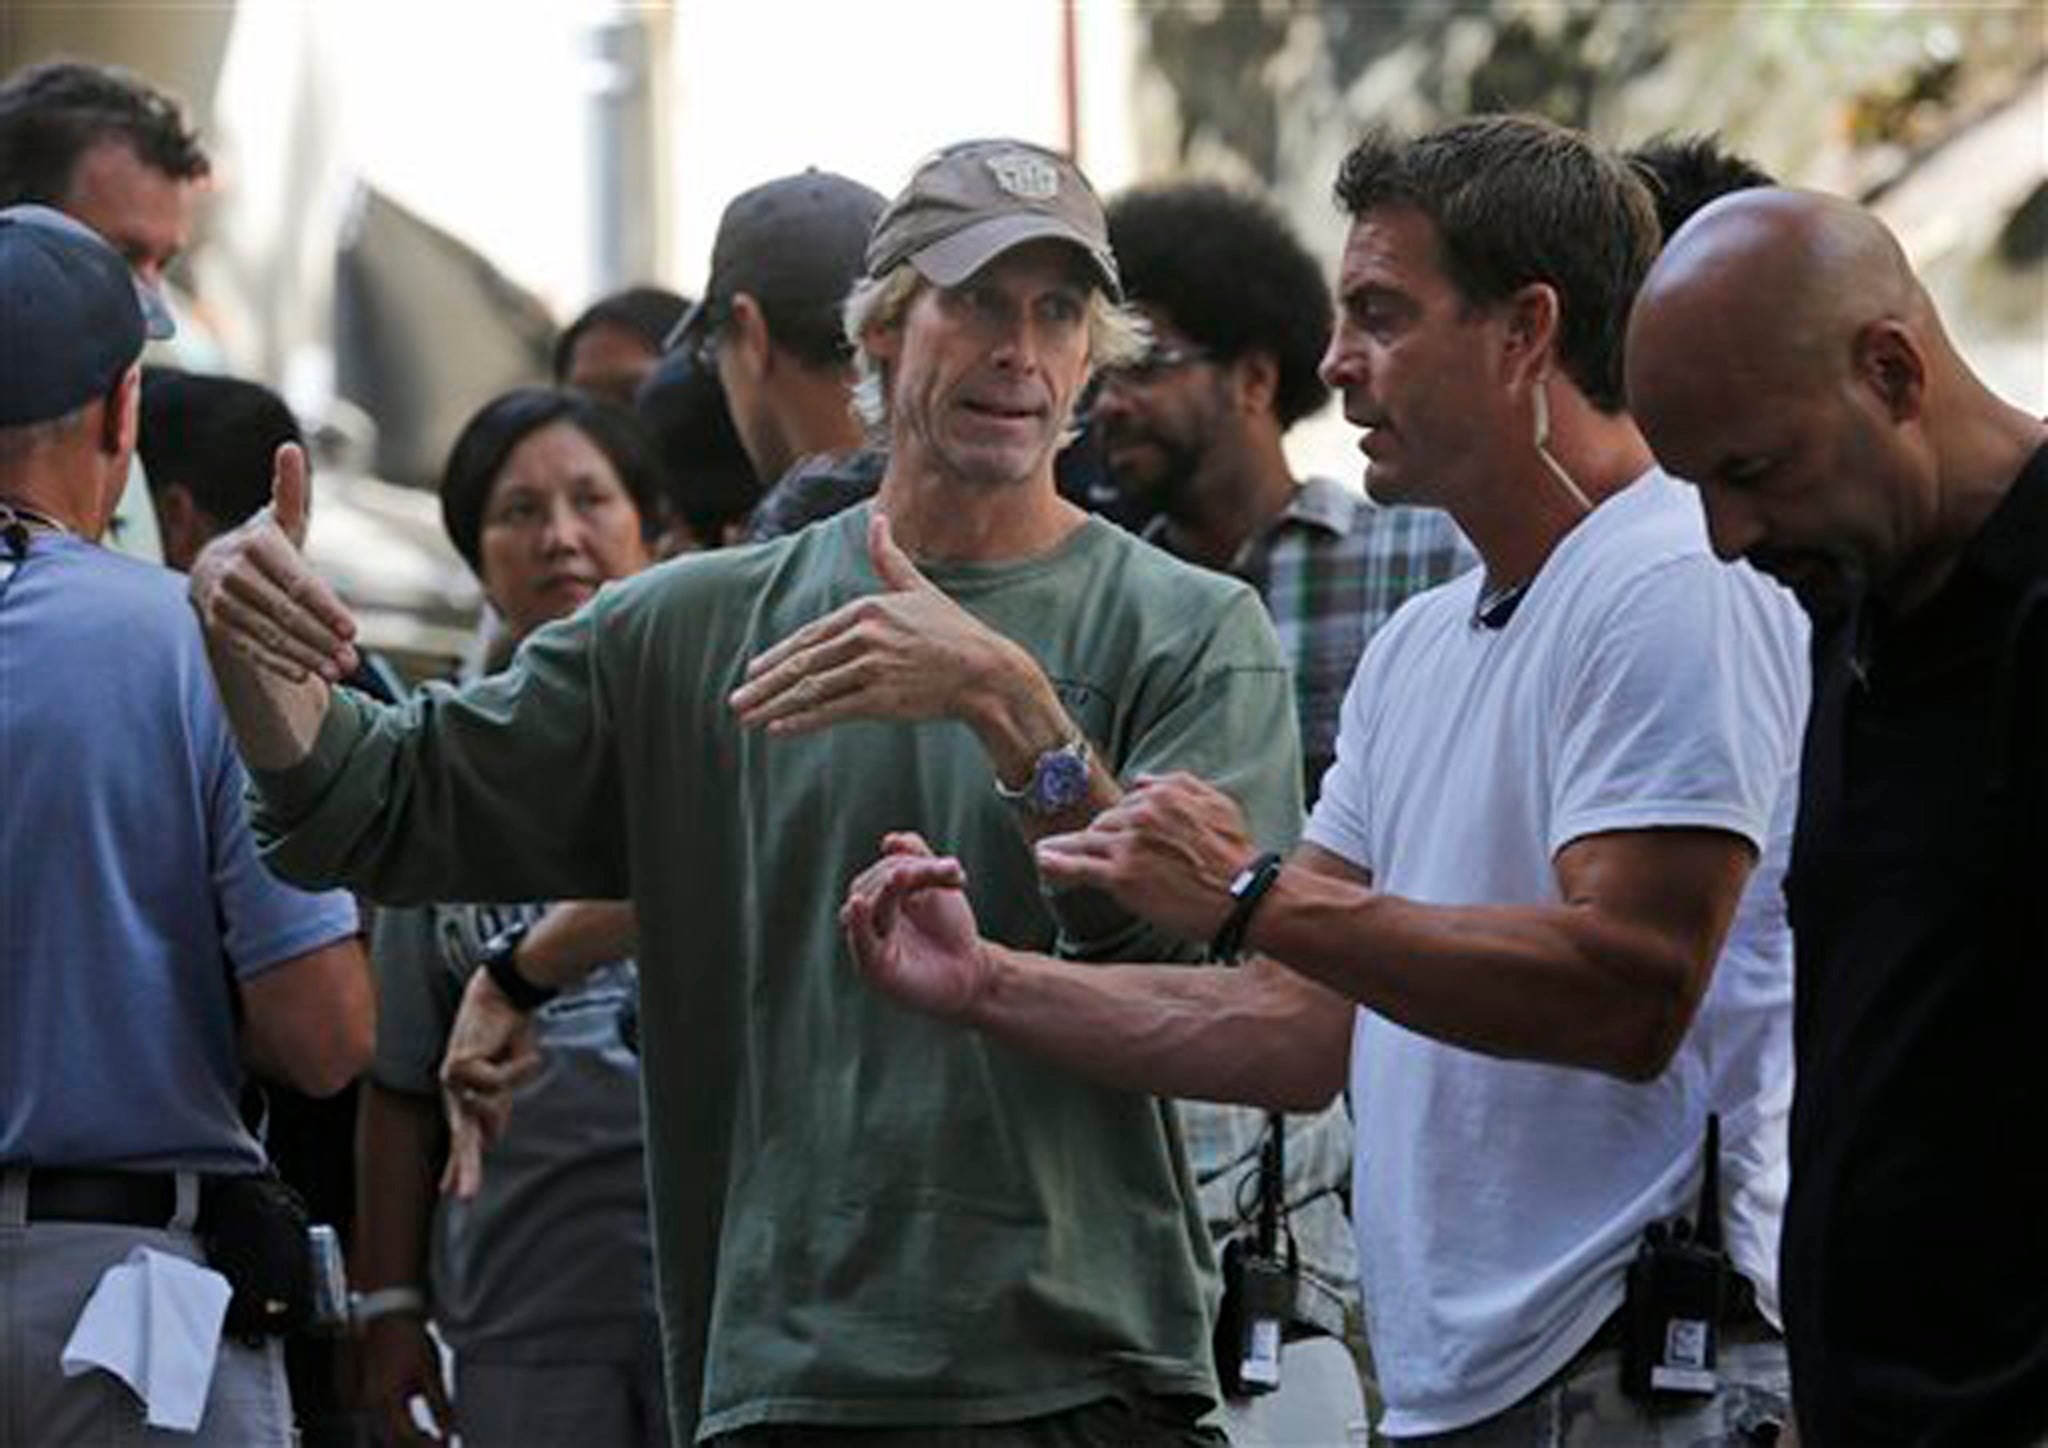 Director Michael Bay on the Transformers 4 film set in Hong Kong